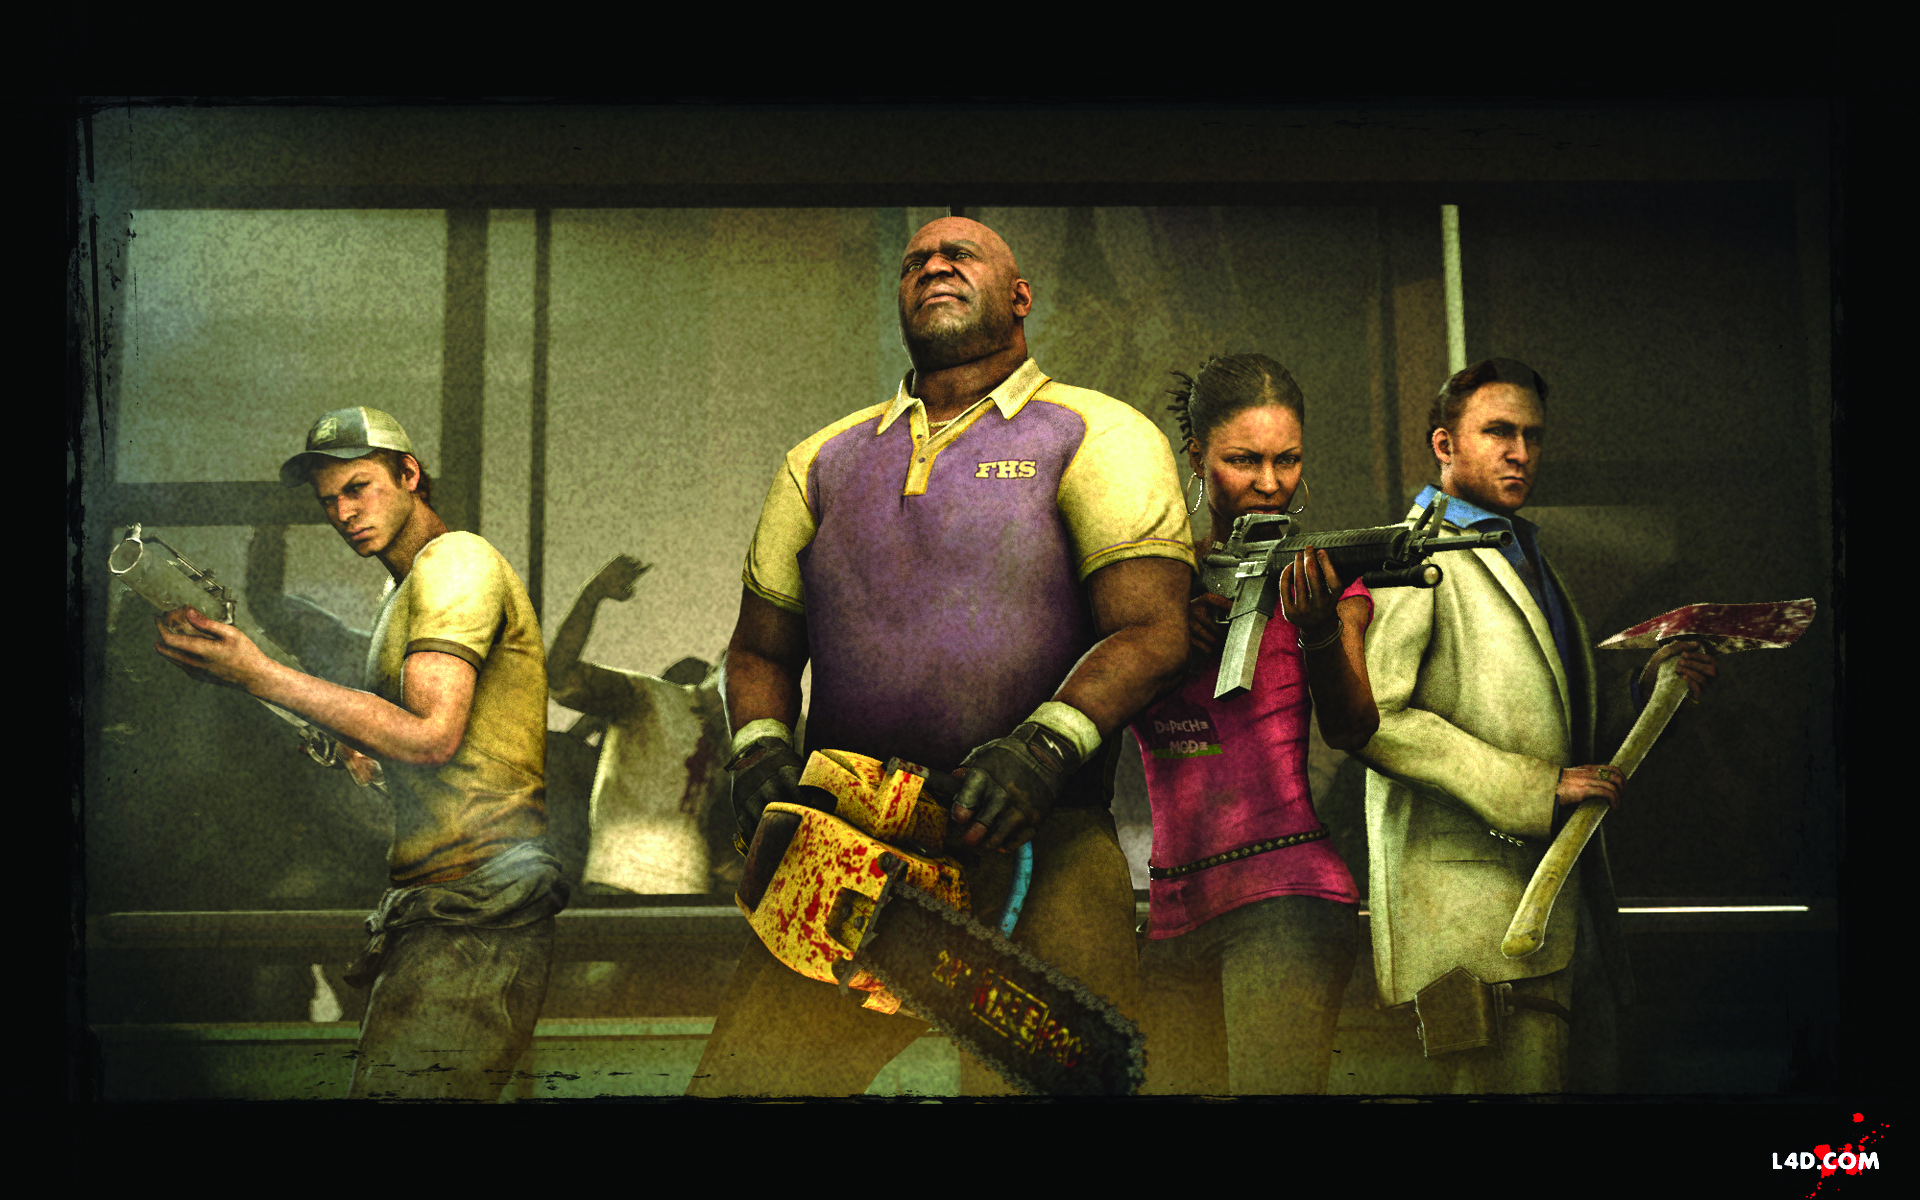 Best co-op games - Left 4 Dead 2 - Four players stand together holding chainsaws, axes, and a gun